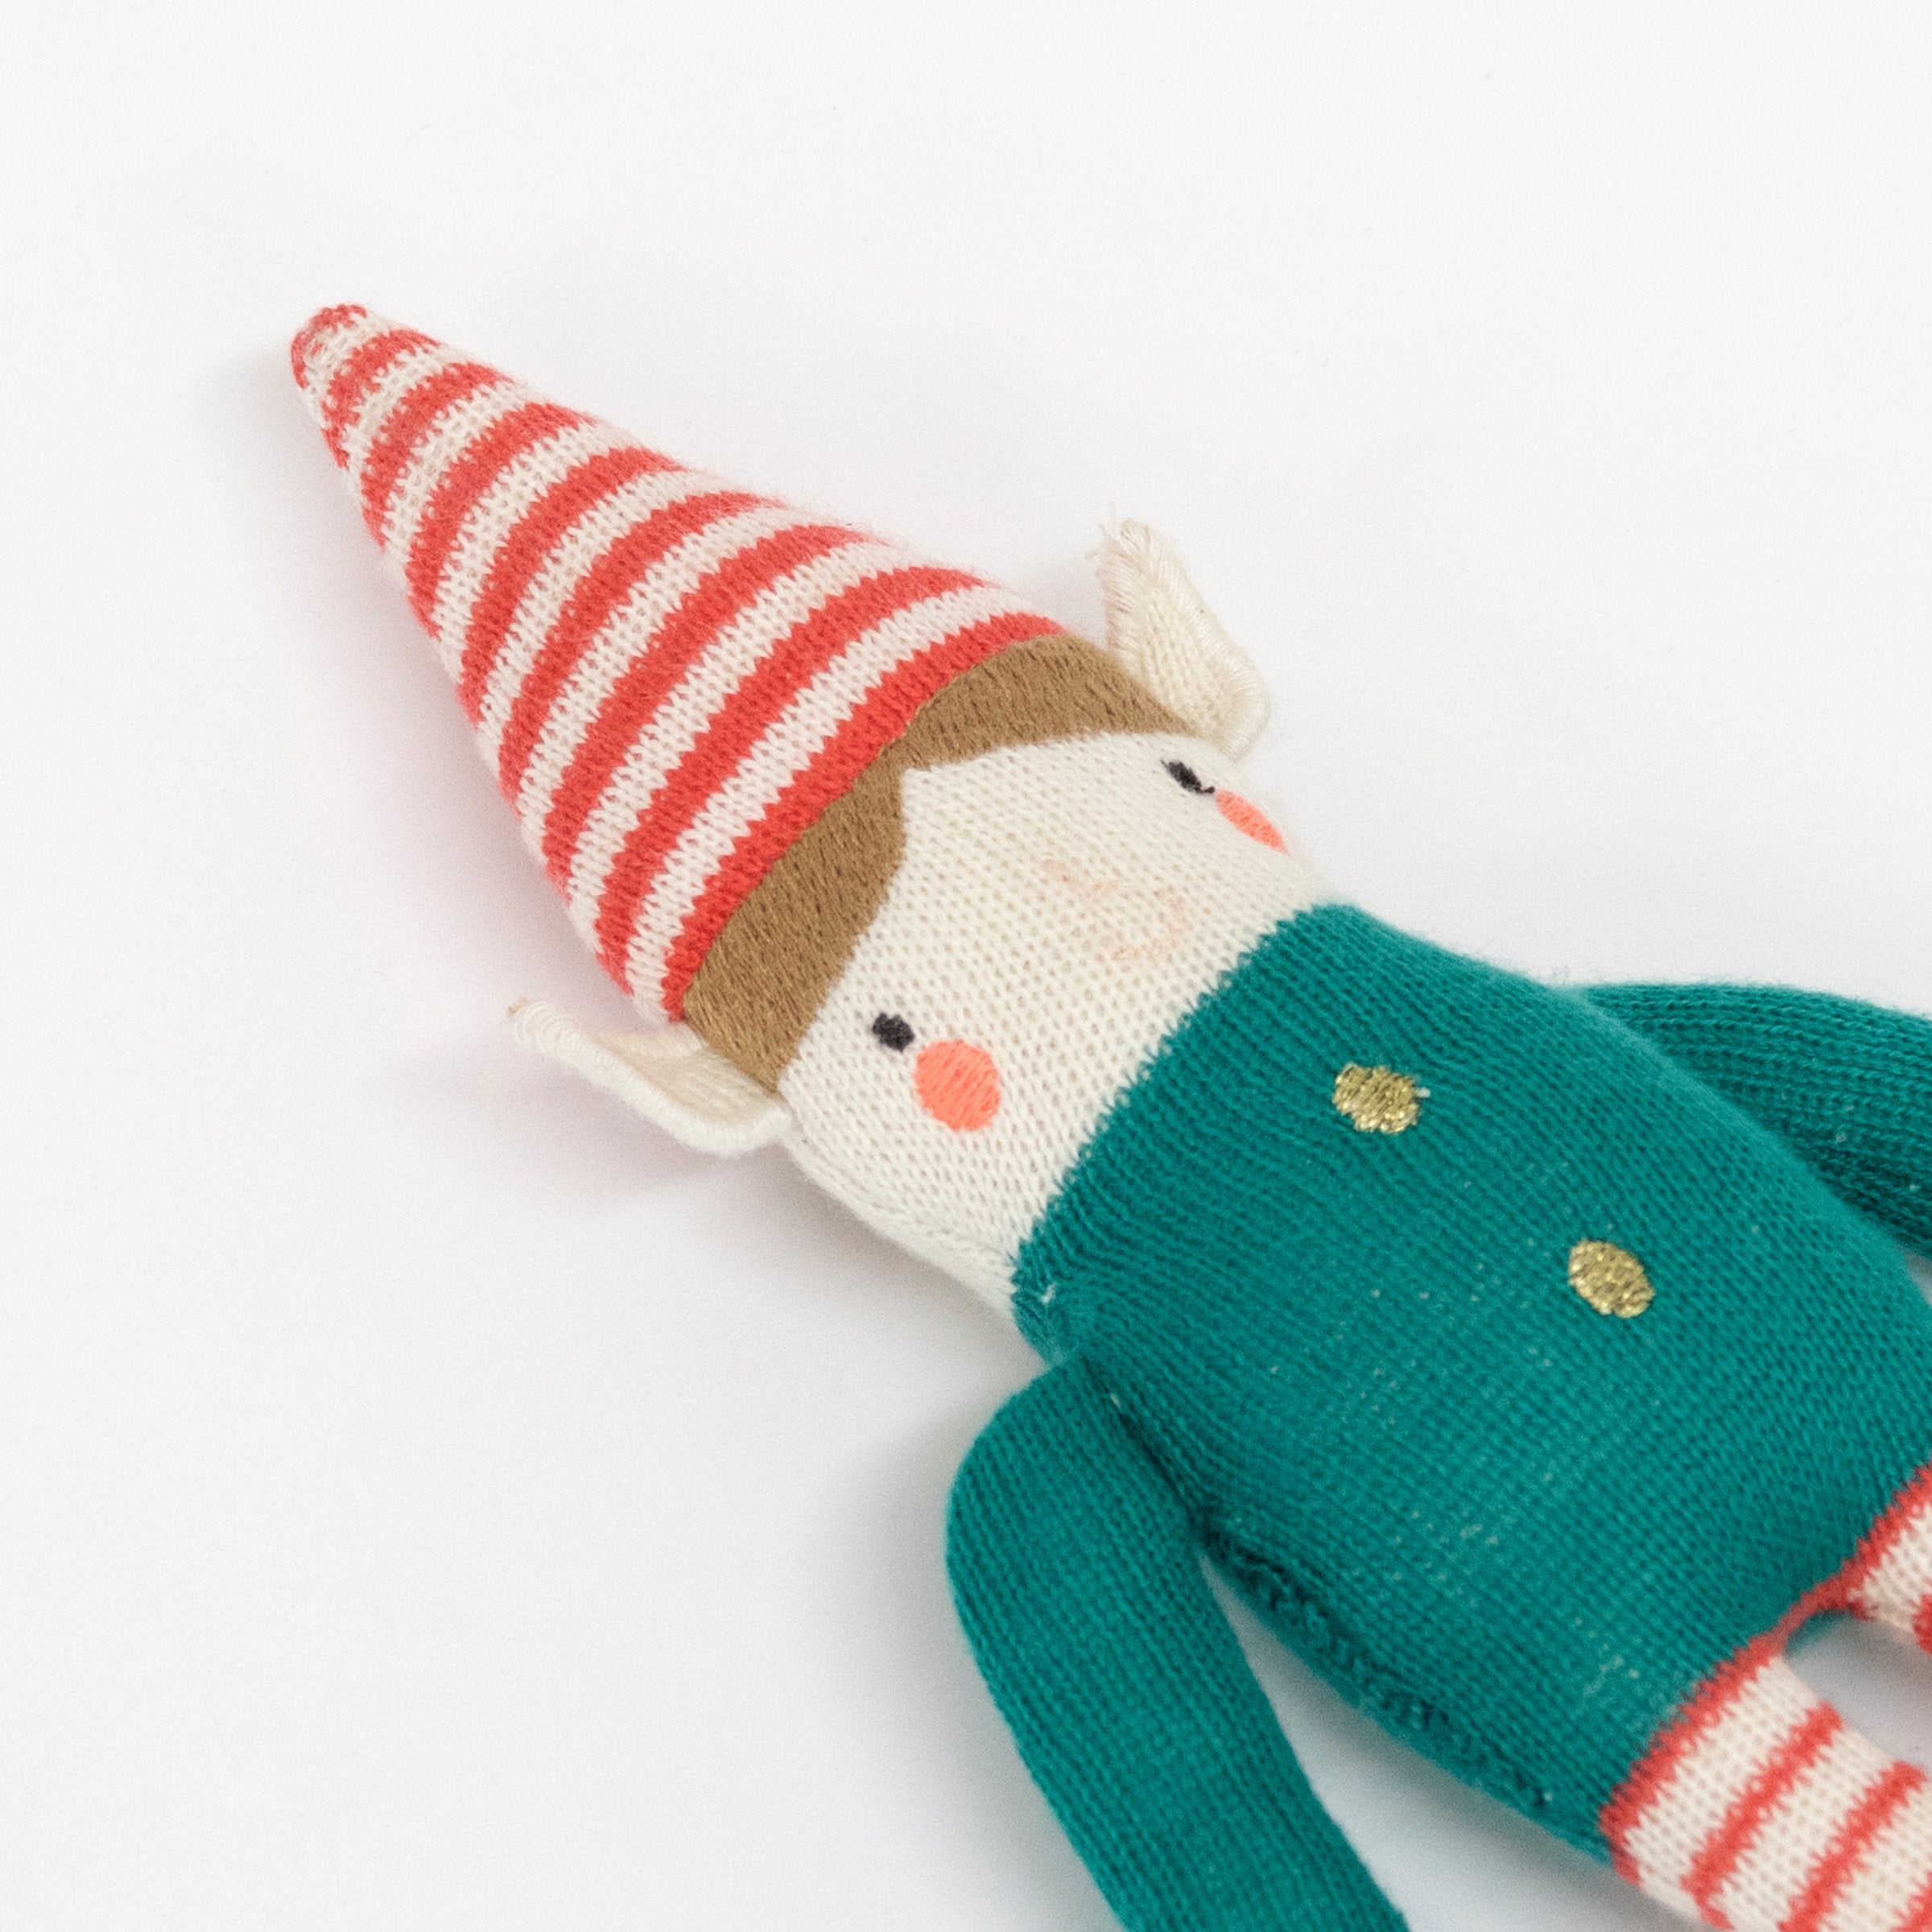 Organic baby toys make a fabulous Christmas gift for babies, like our organic cotton Elf rattle.